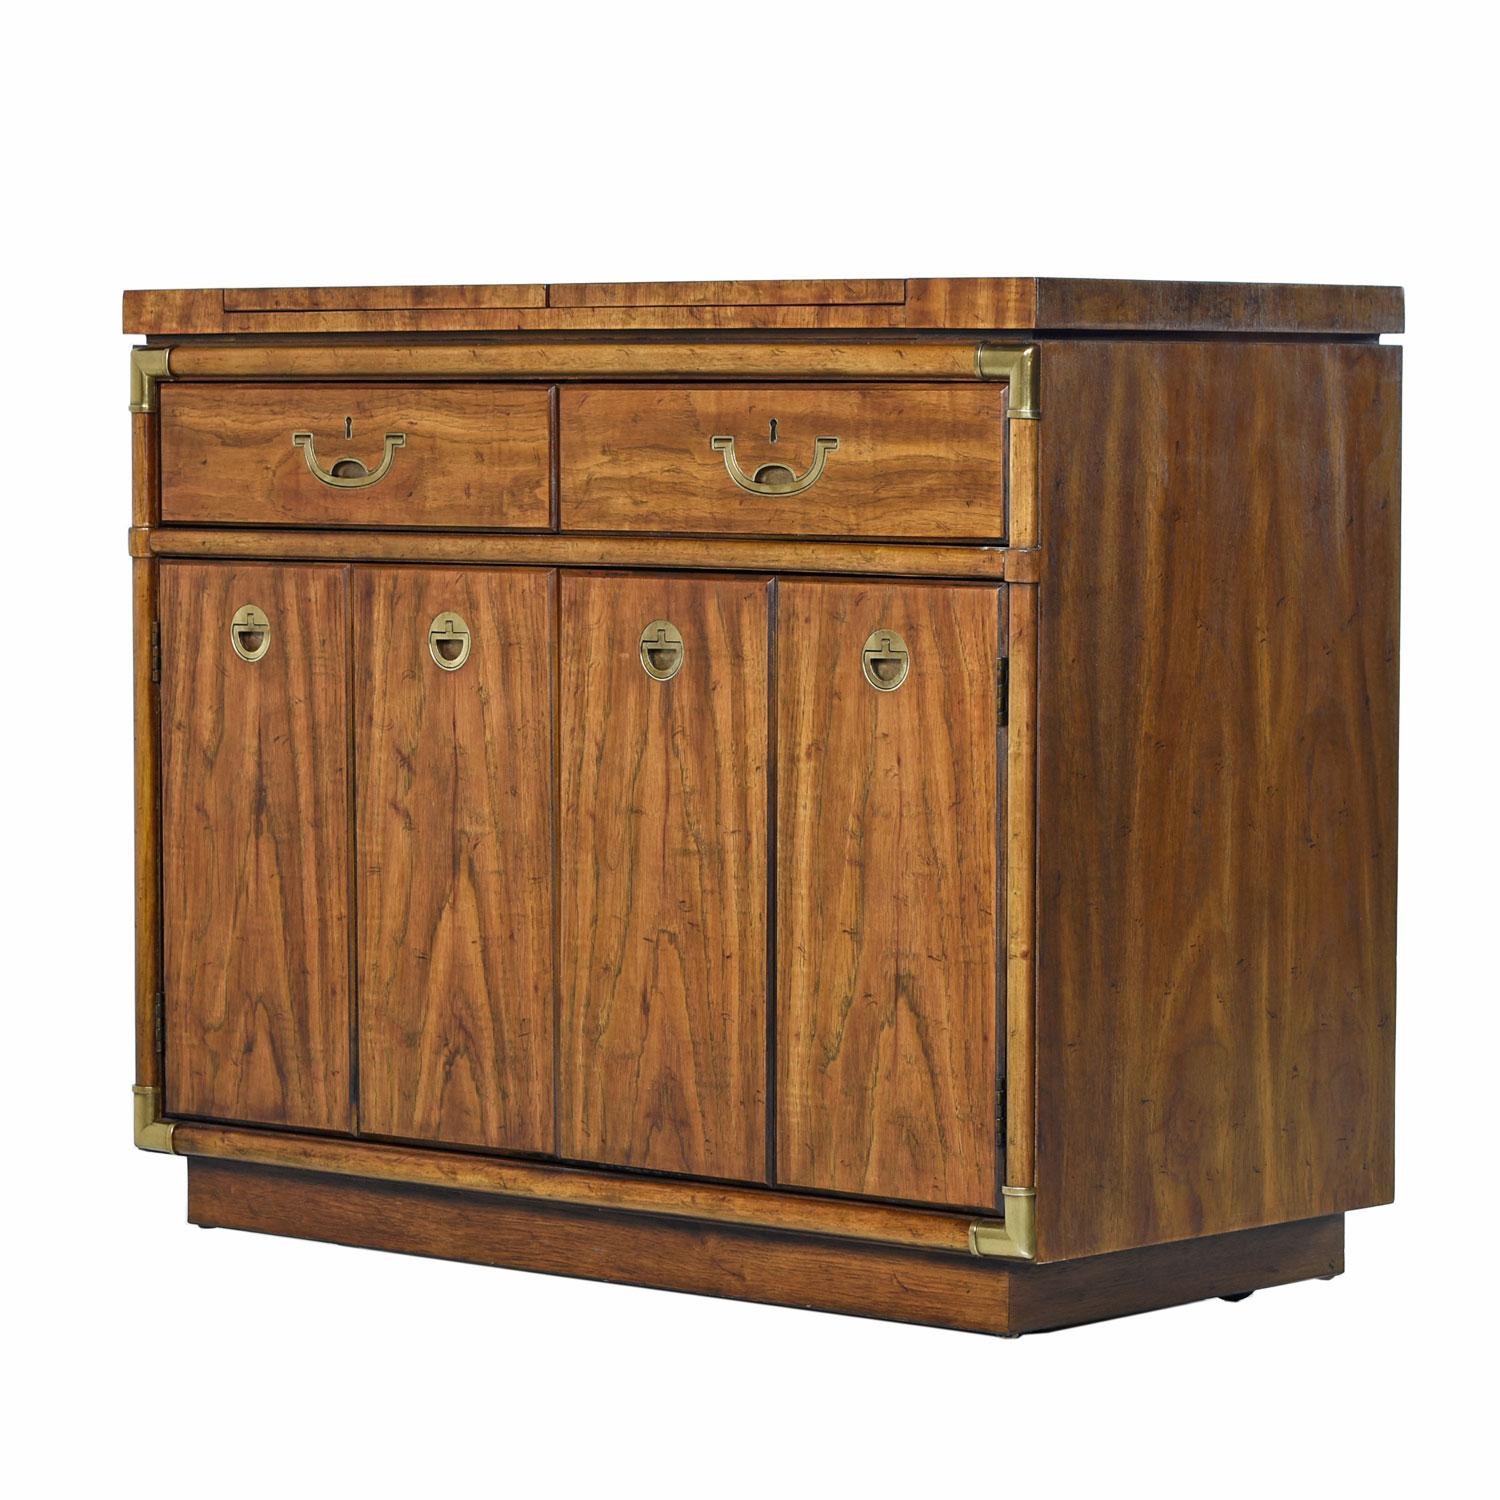 Dorothy Draper style campaign server bar cart on casters made by esteemed US furniture maker Drexel Heritage circa 1970s. Old growth flaxen flared grain pecan top to bottom. Beautifully finished on all four sides. Faux bamboo brass corner accents on